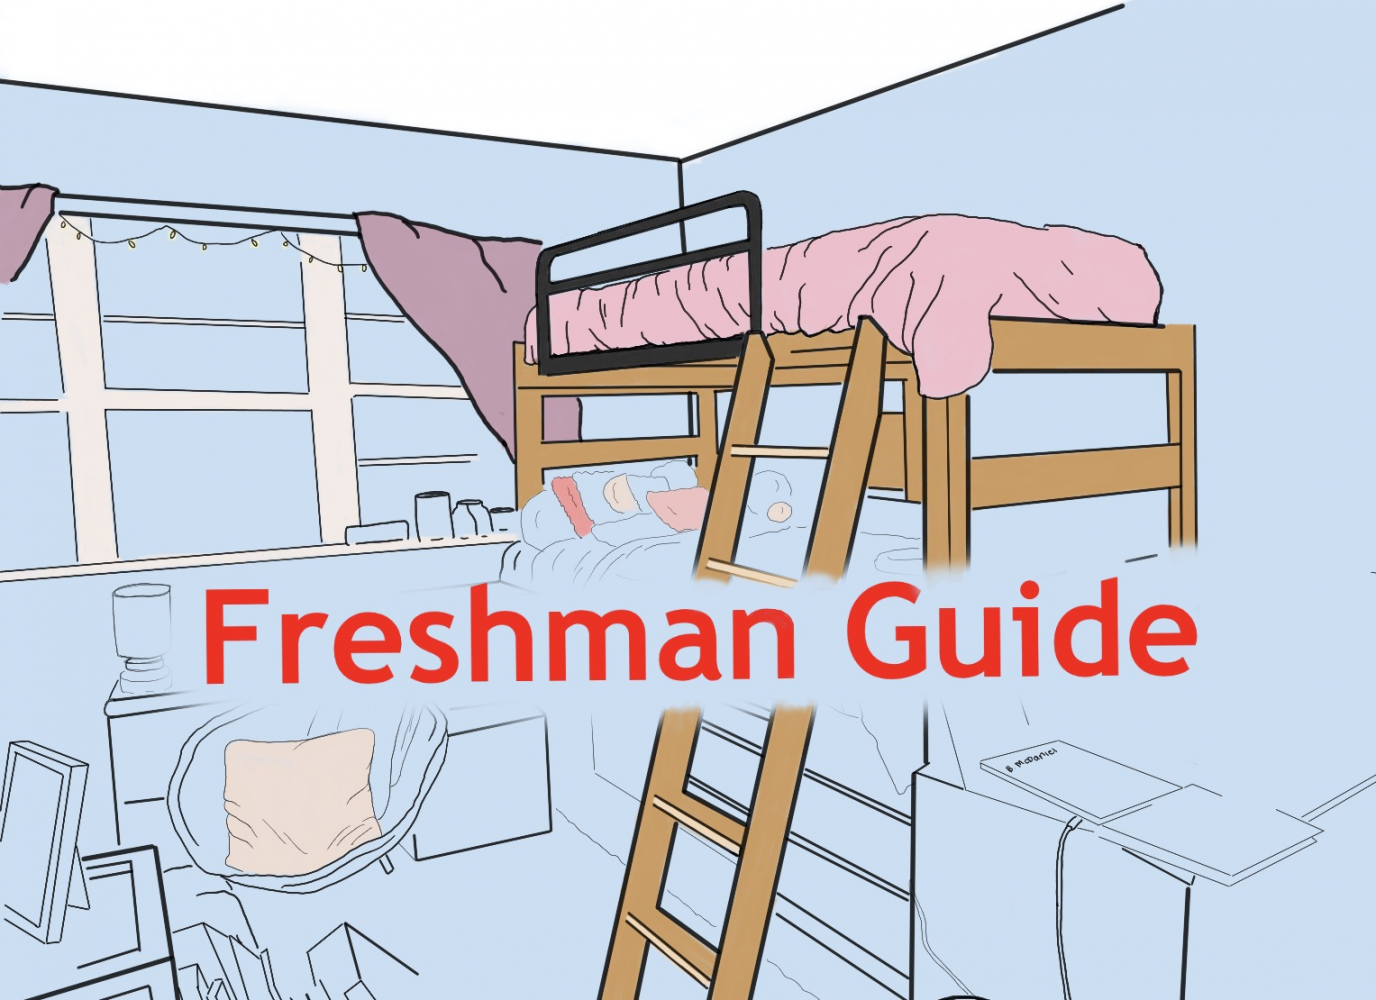 Guide to being a freshman Photo credit: Briana Mcdaniel